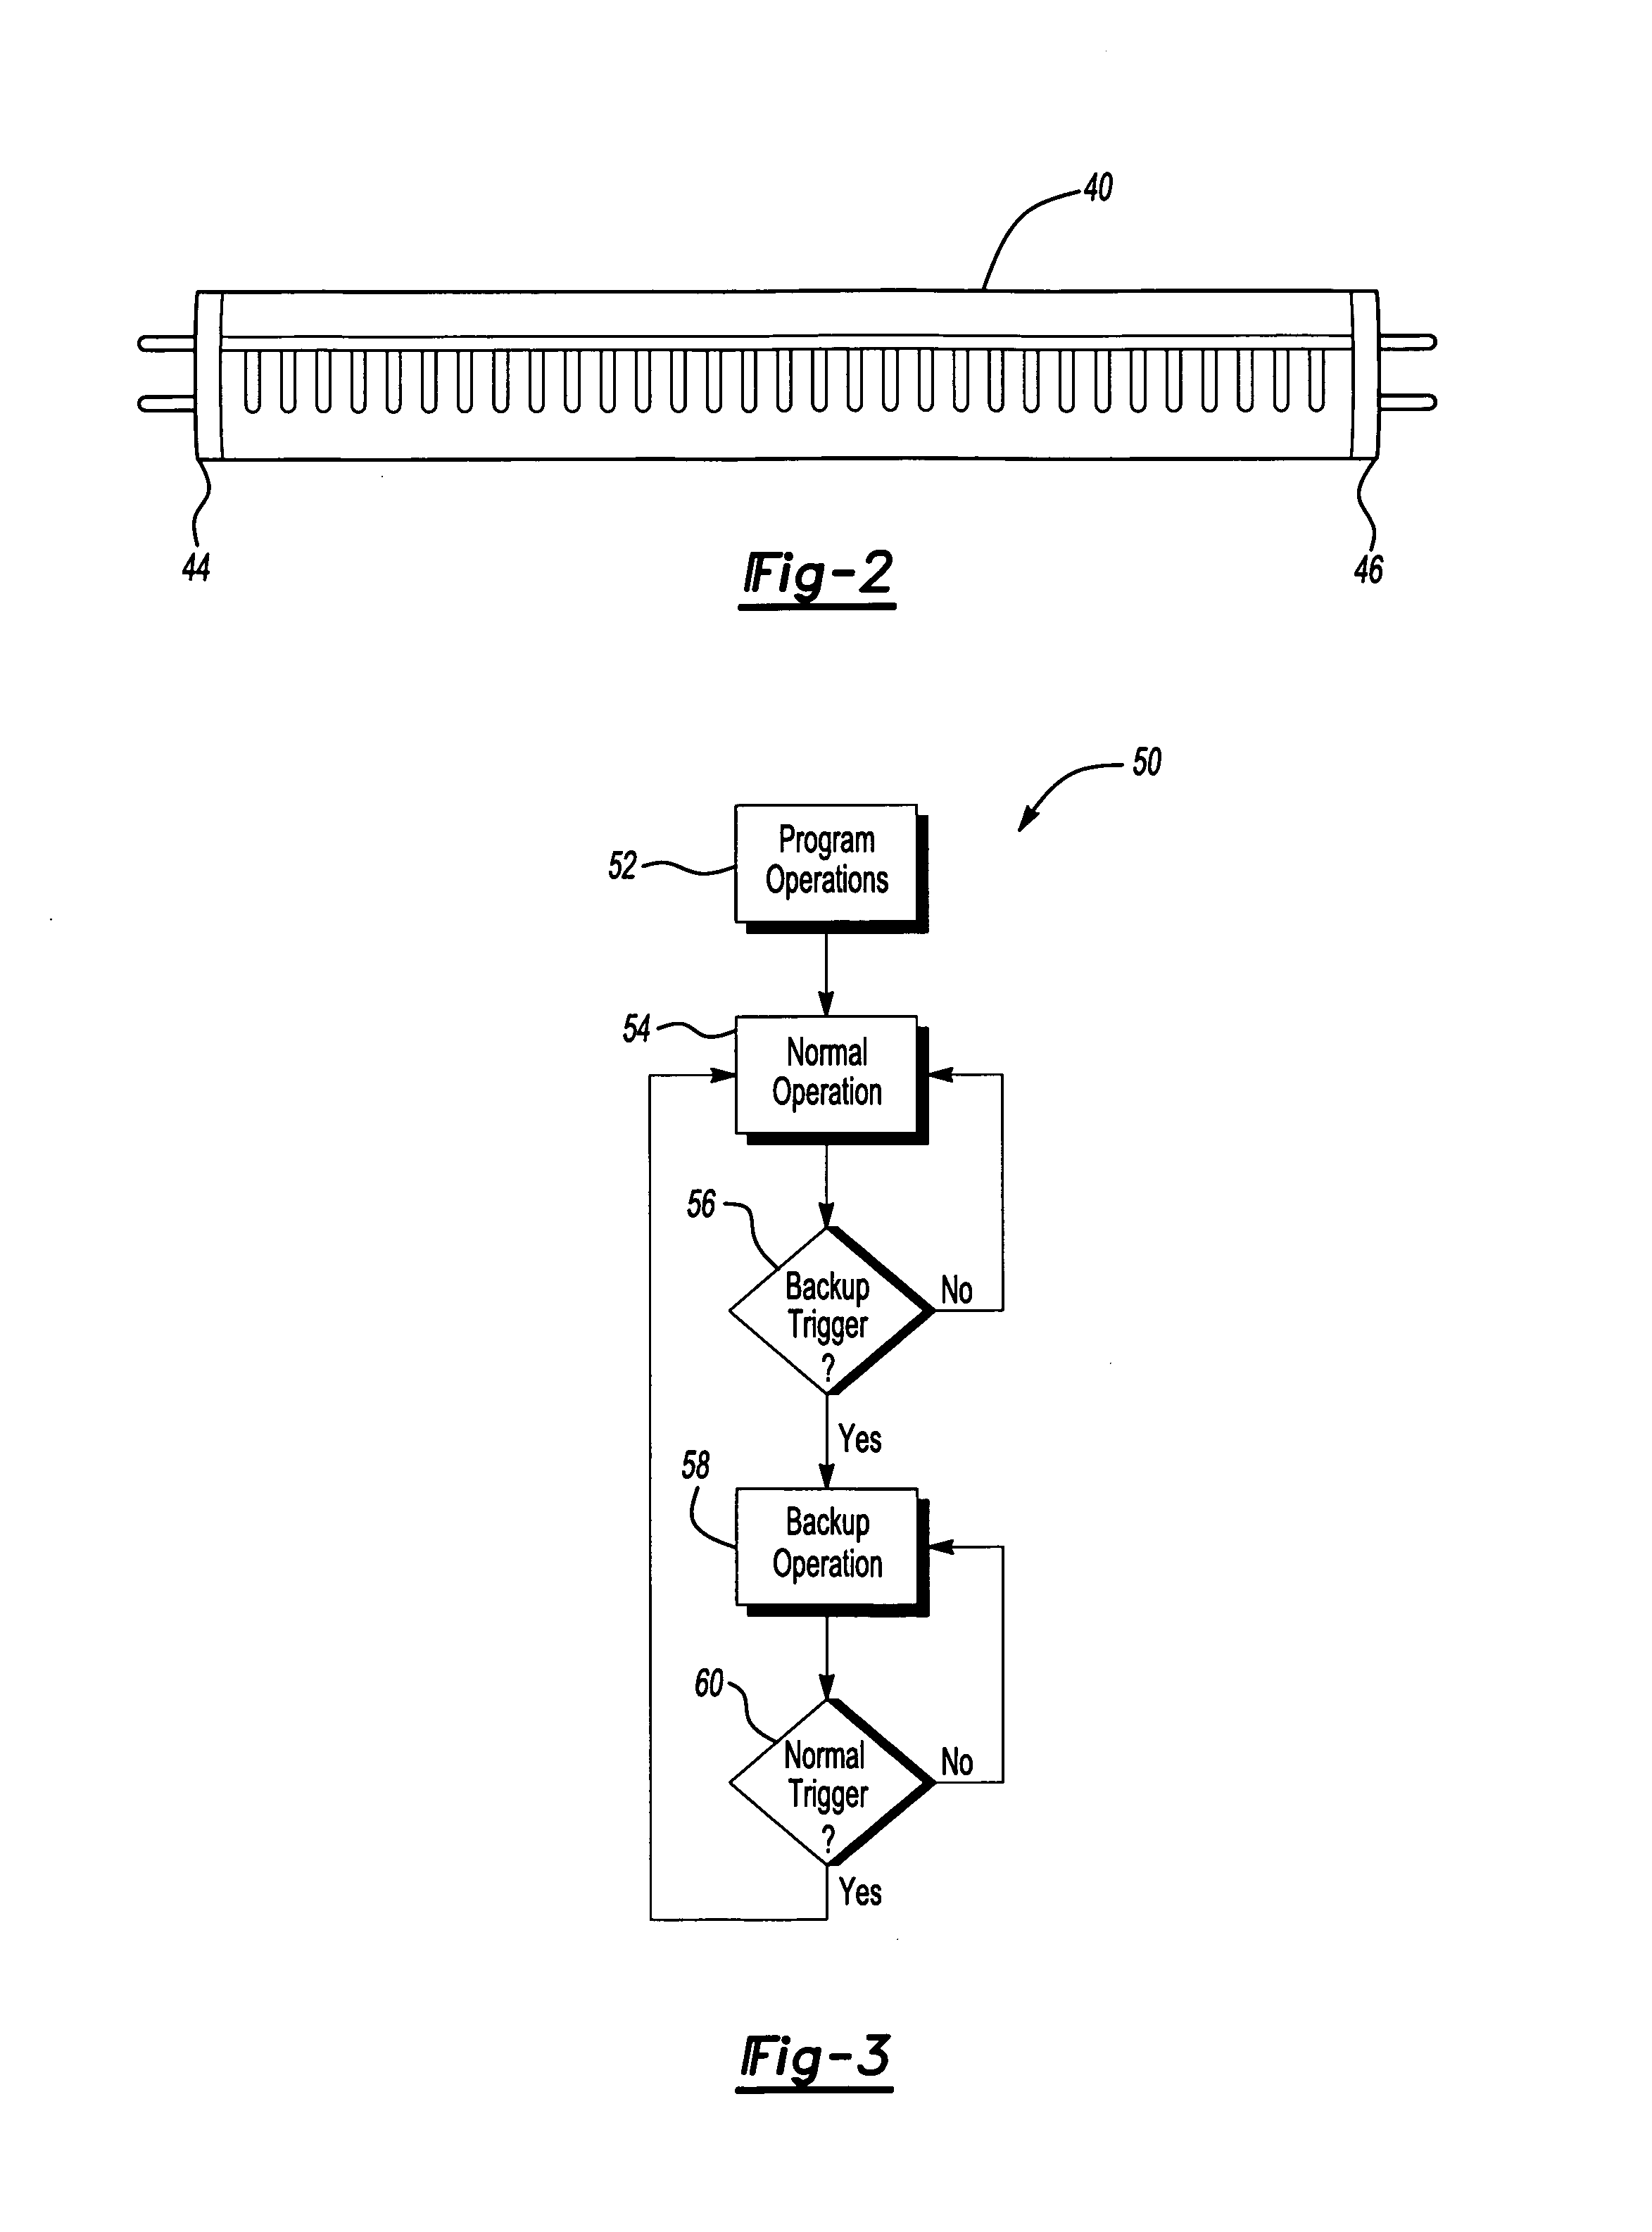 Lighting device with multiple power sources and multiple modes of operation